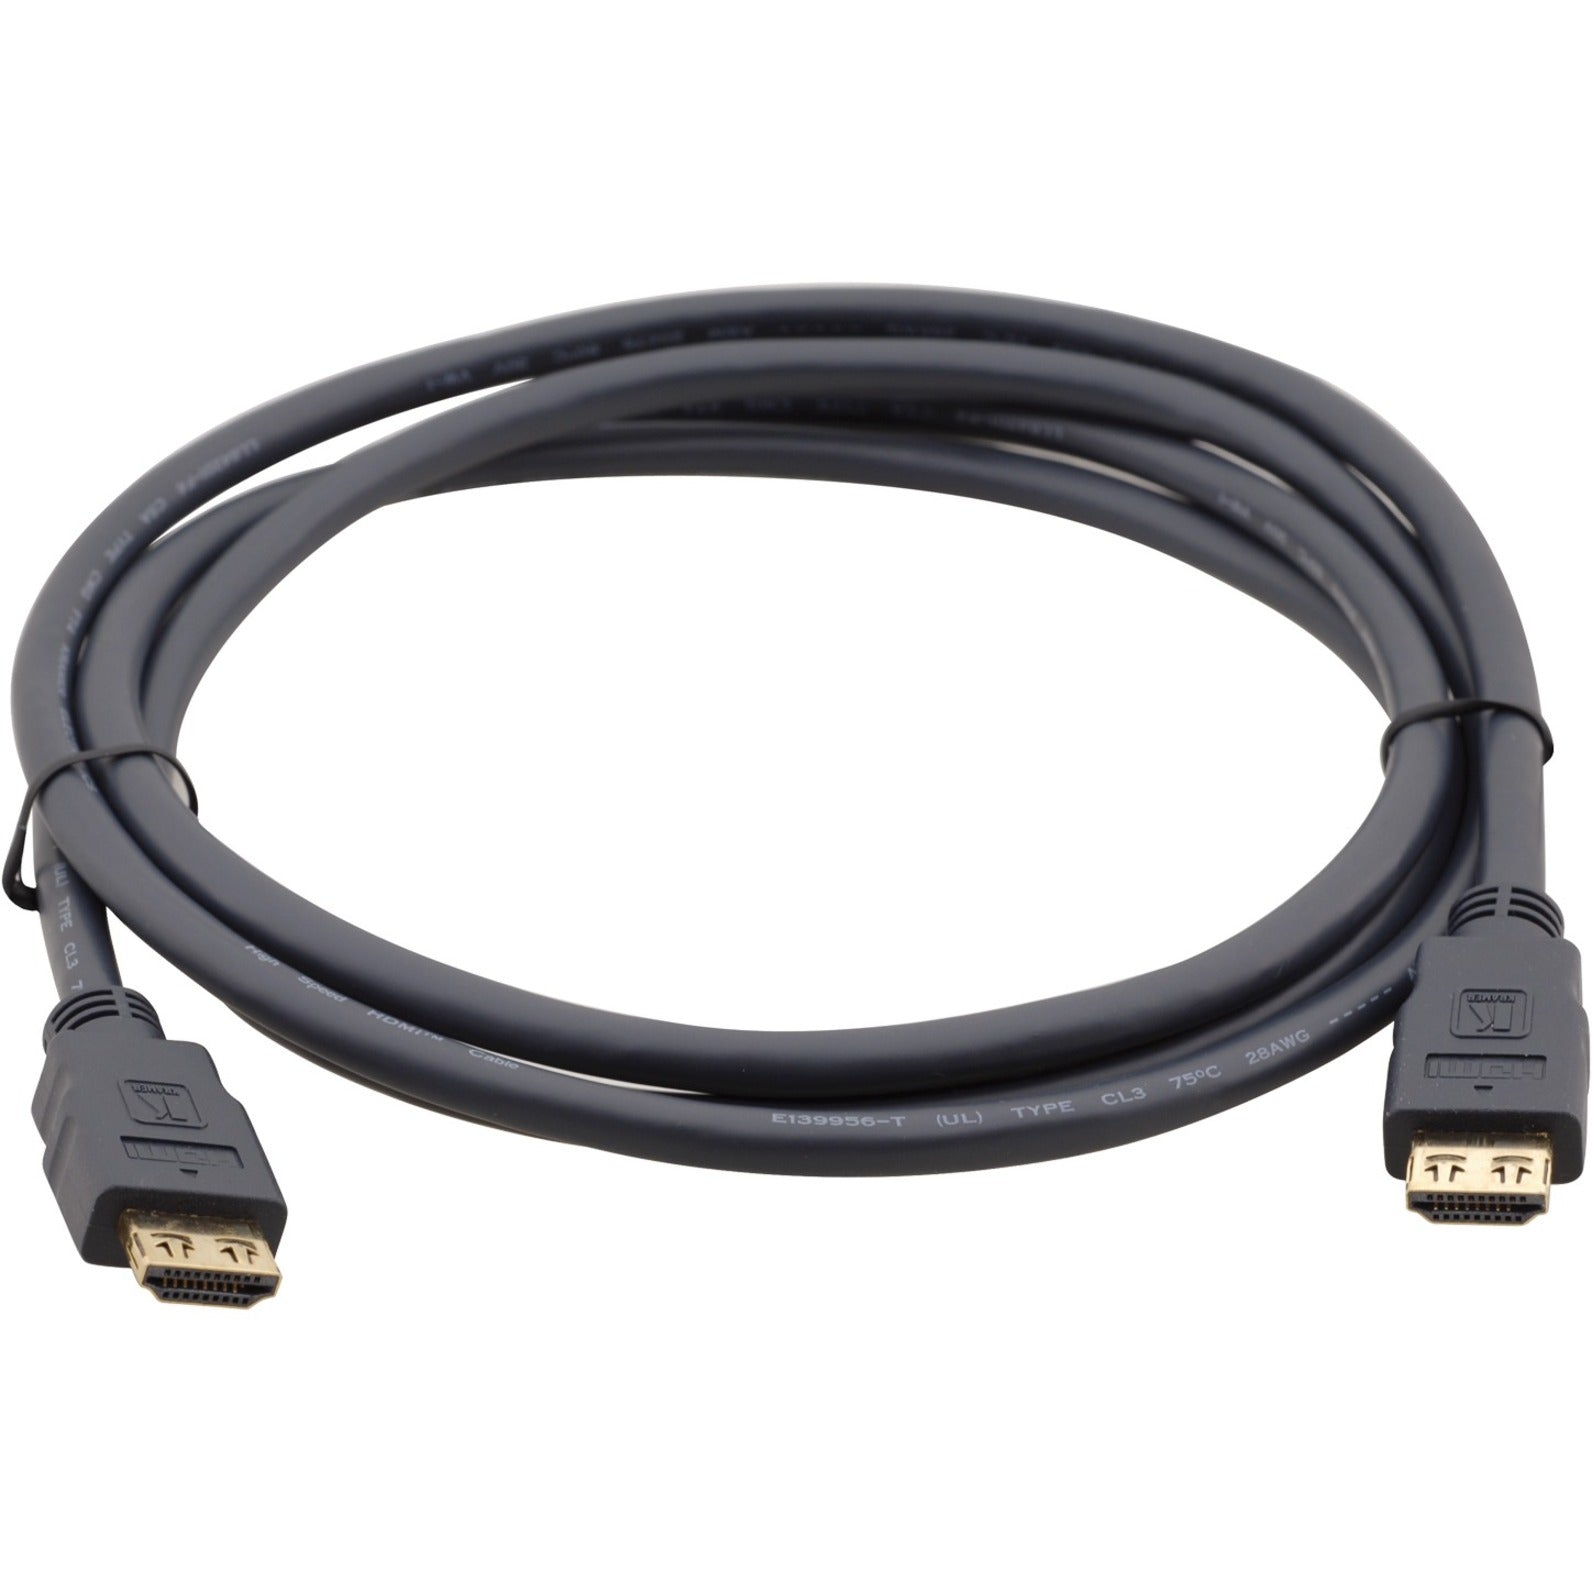 Kramer 97-0101010 Standard HDMI (M) to HDMI (M) Cable 10 ft Gold Plated K-Lock Molded Kramer 97-0101010 Cavo HDMI standard (M) a HDMI (M) 10 ft placcato in oro K-Lock stampato